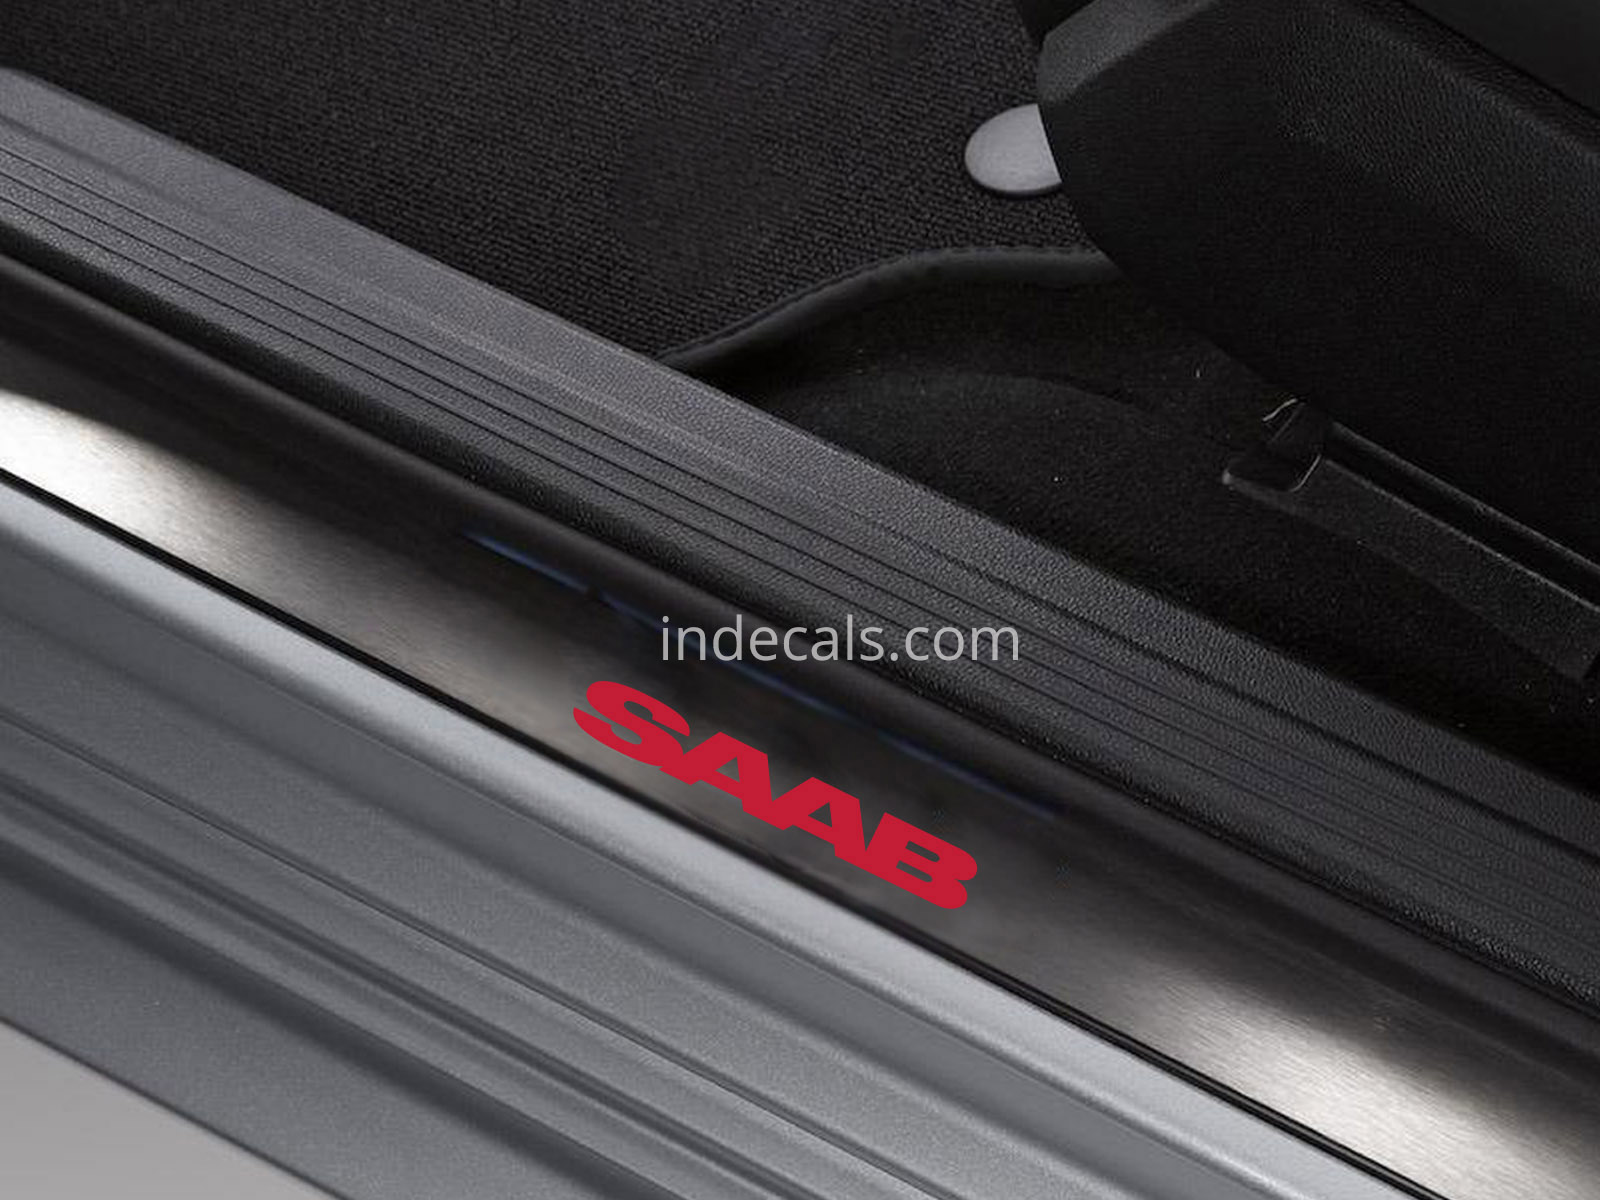 6 x Saab Stickers for Door Sills - Red